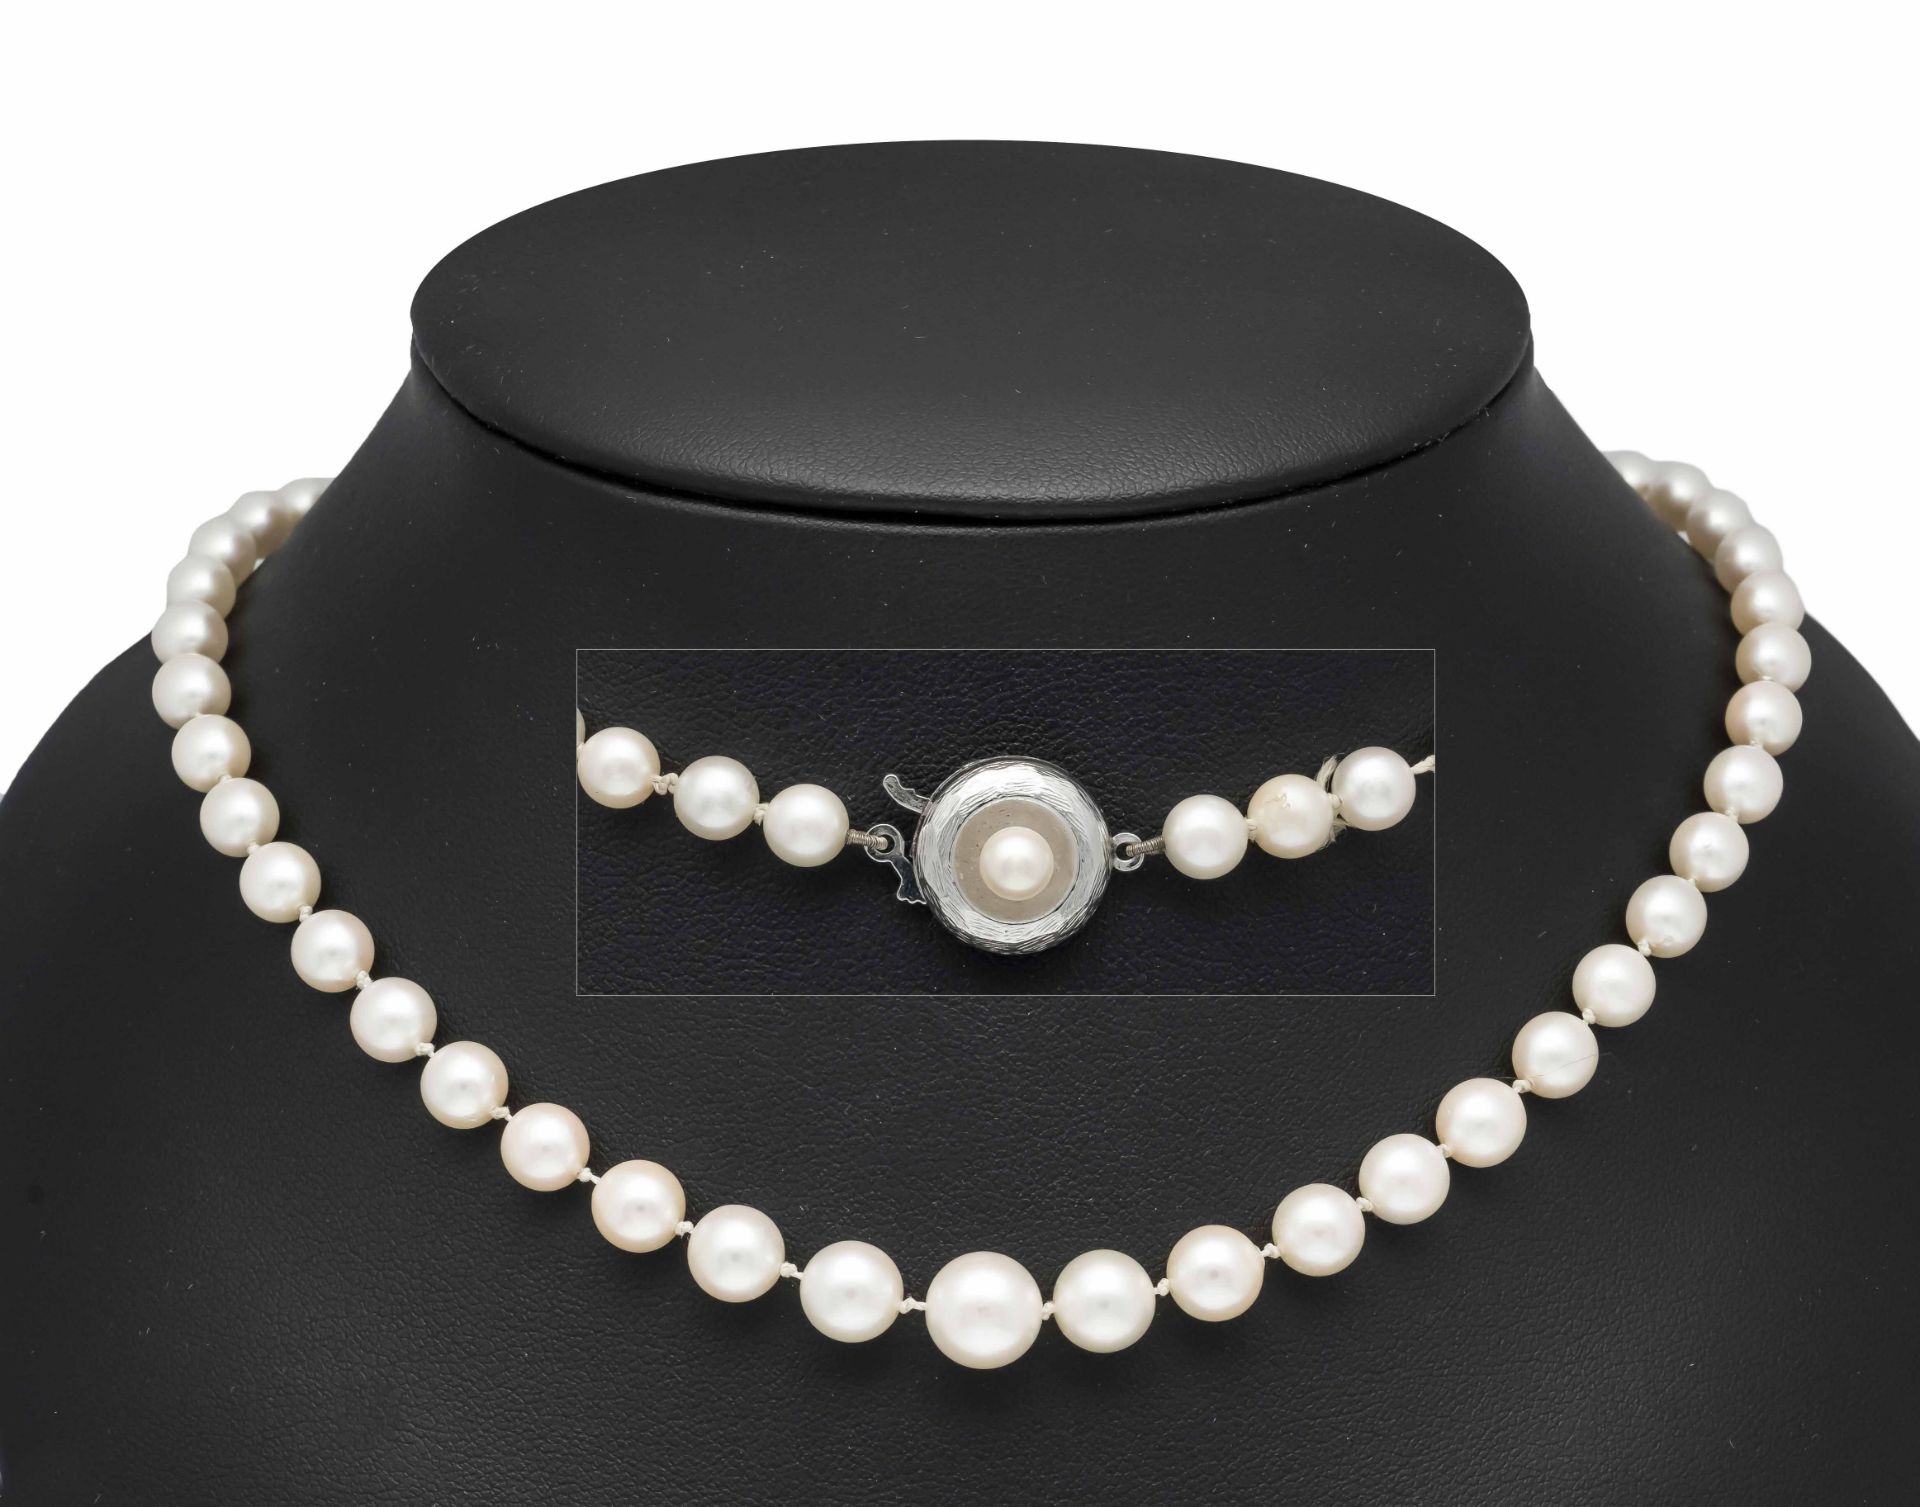 Akoya pearl necklace with pin clasp WG 333/000 set with ceme white Akoya pearl 5 mm, strand of